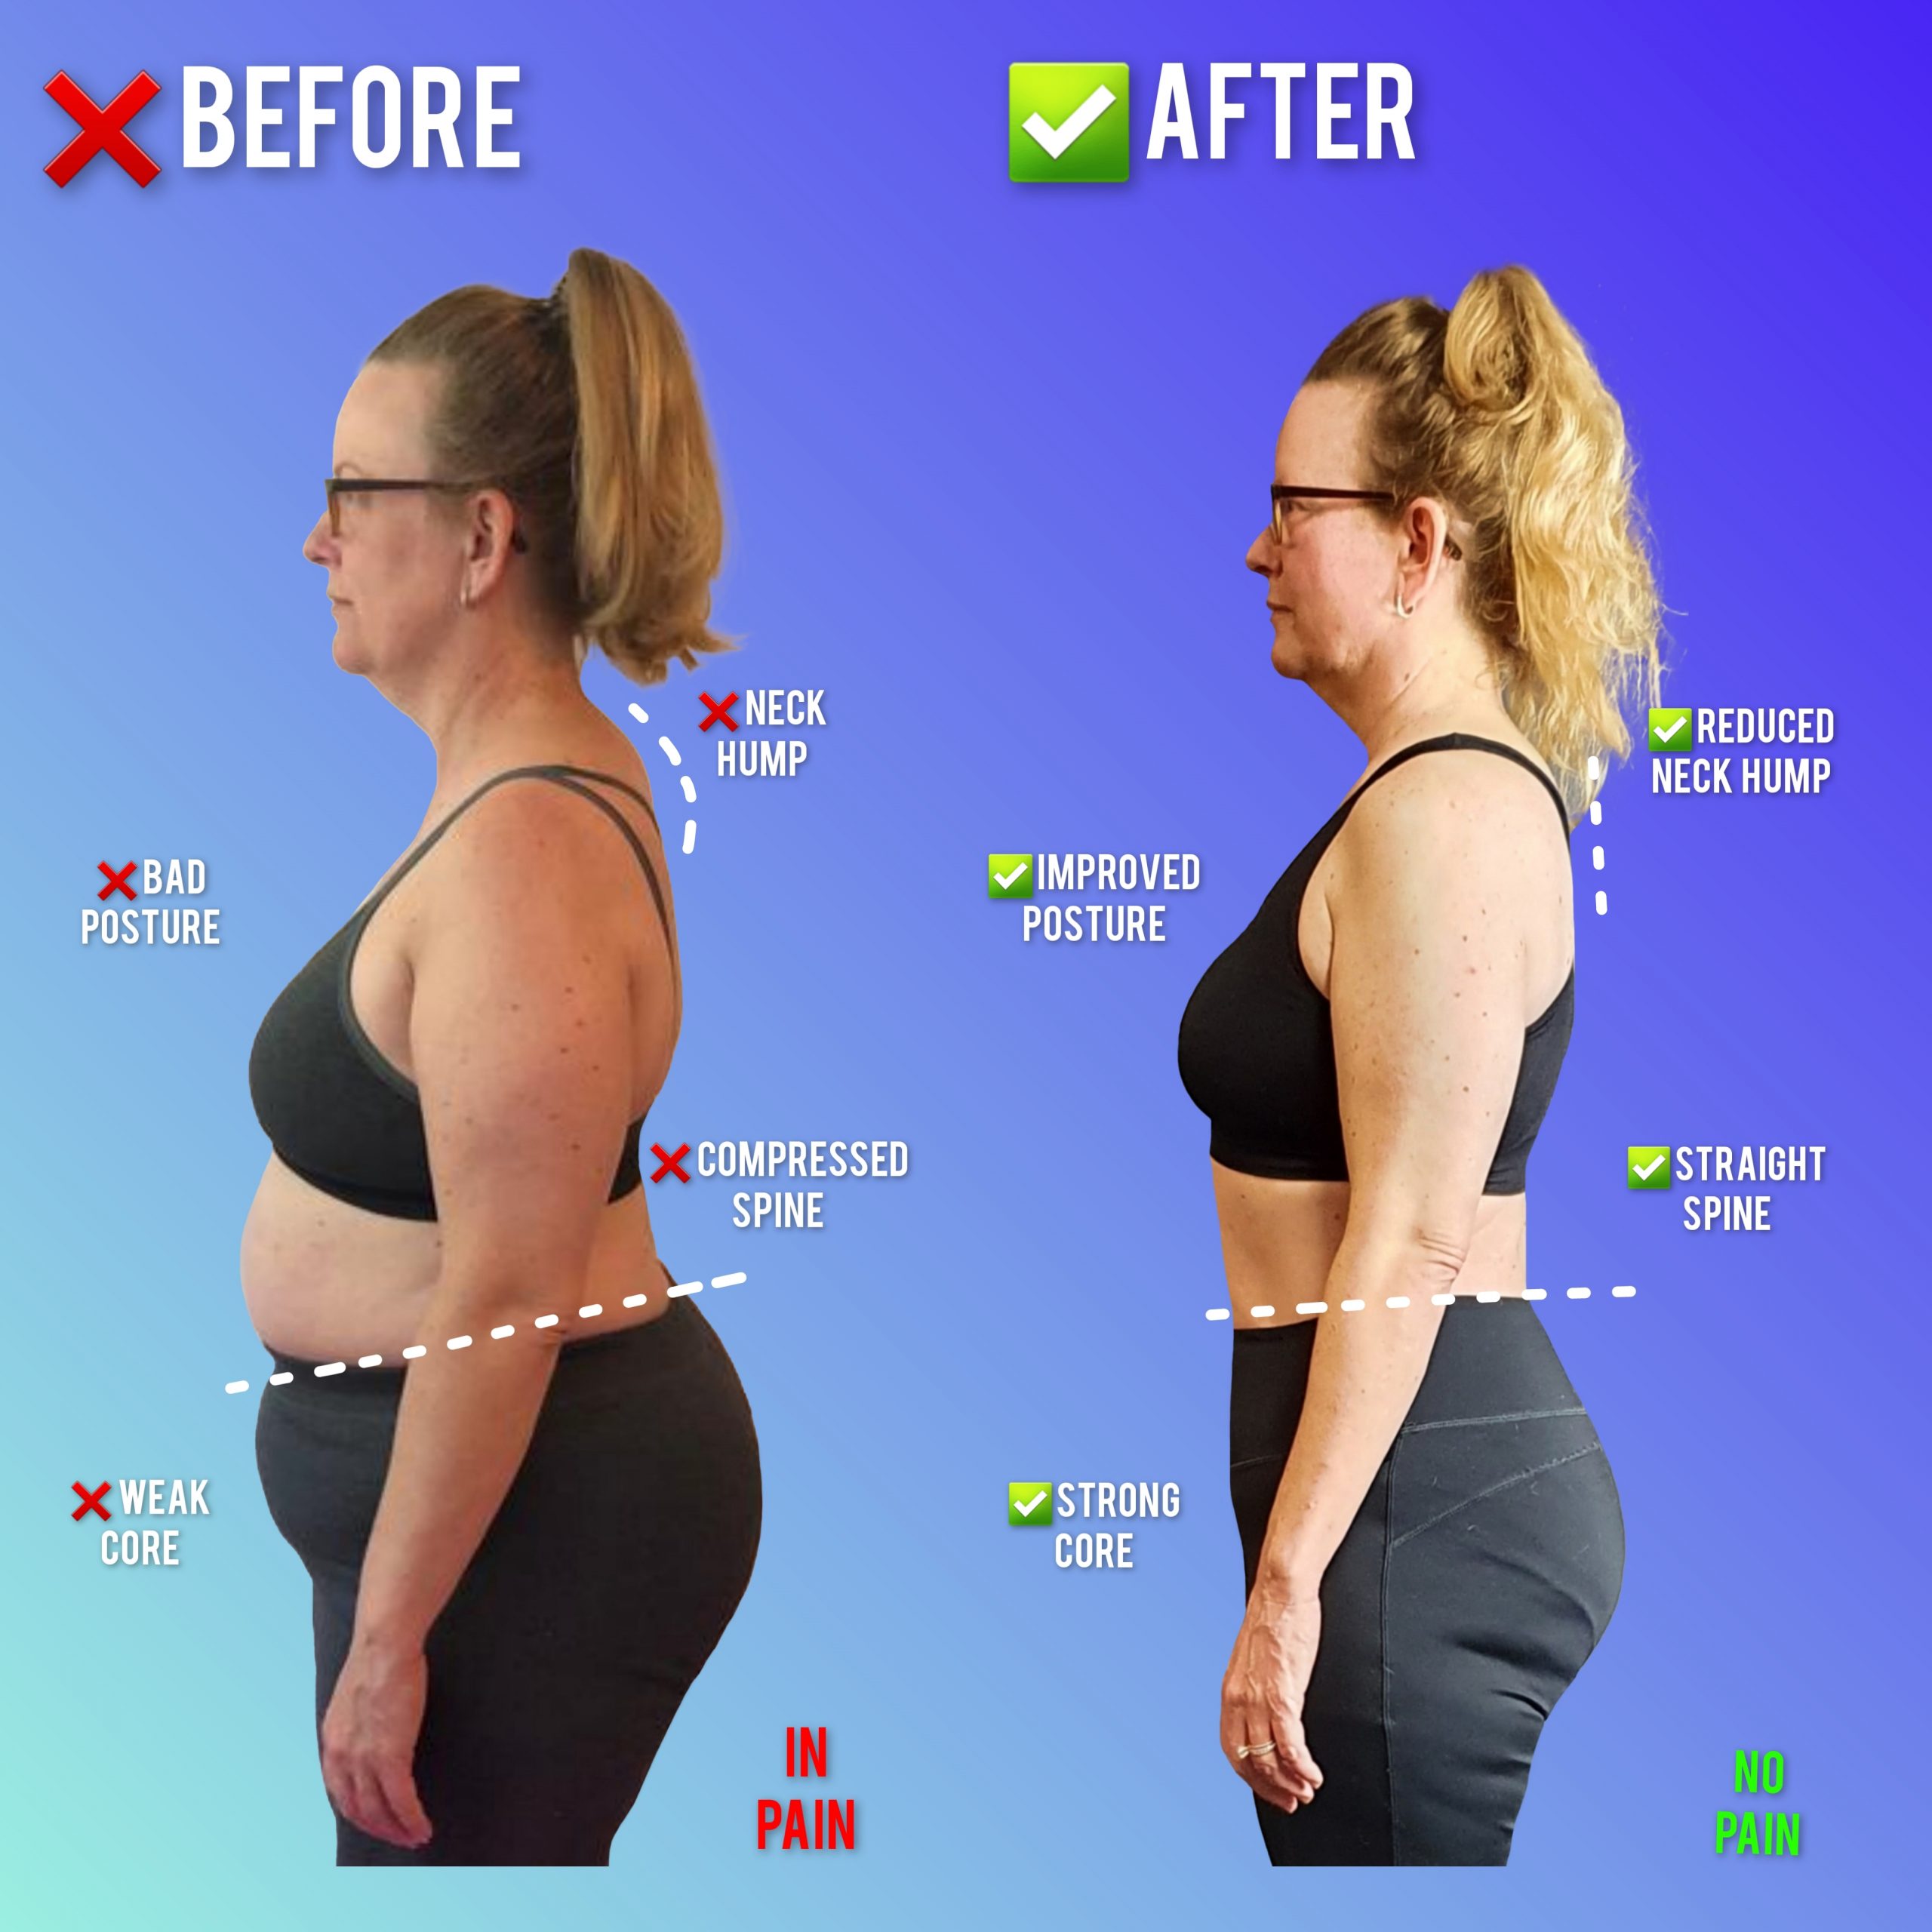 Weight loss and neck hump reduction MihaPower